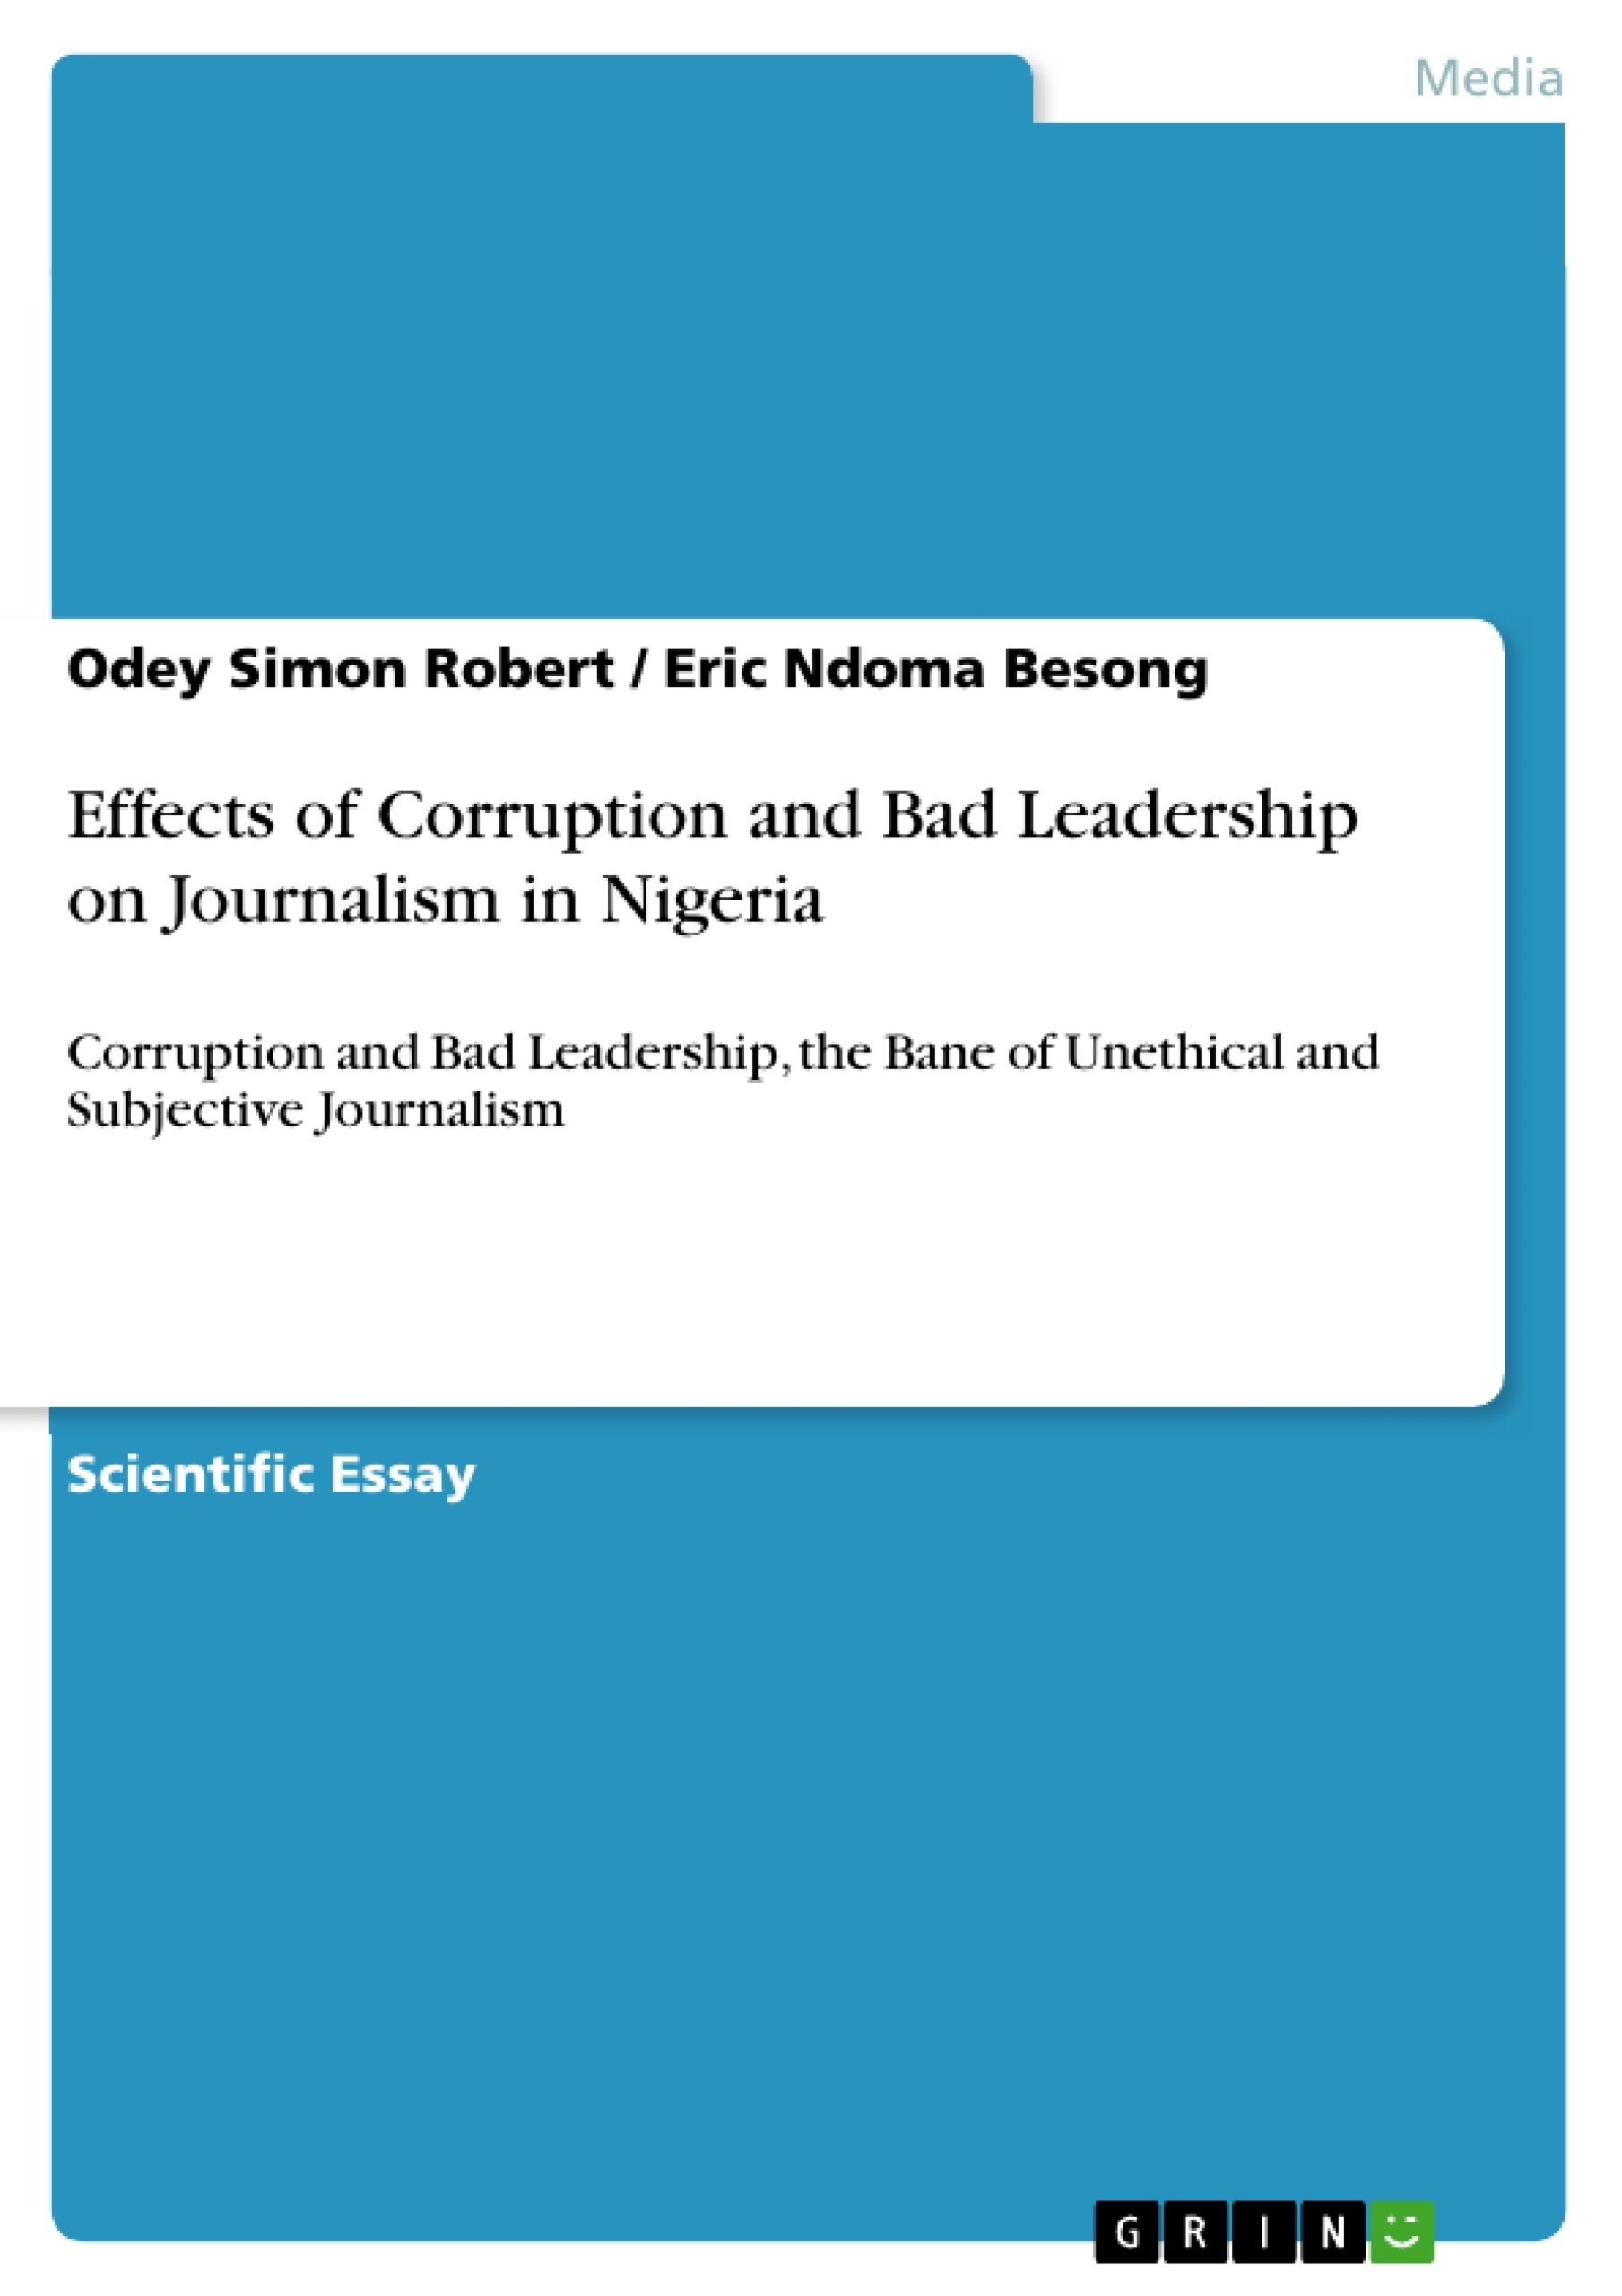 Title: Effects of Corruption and Bad Leadership on Journalism in Nigeria